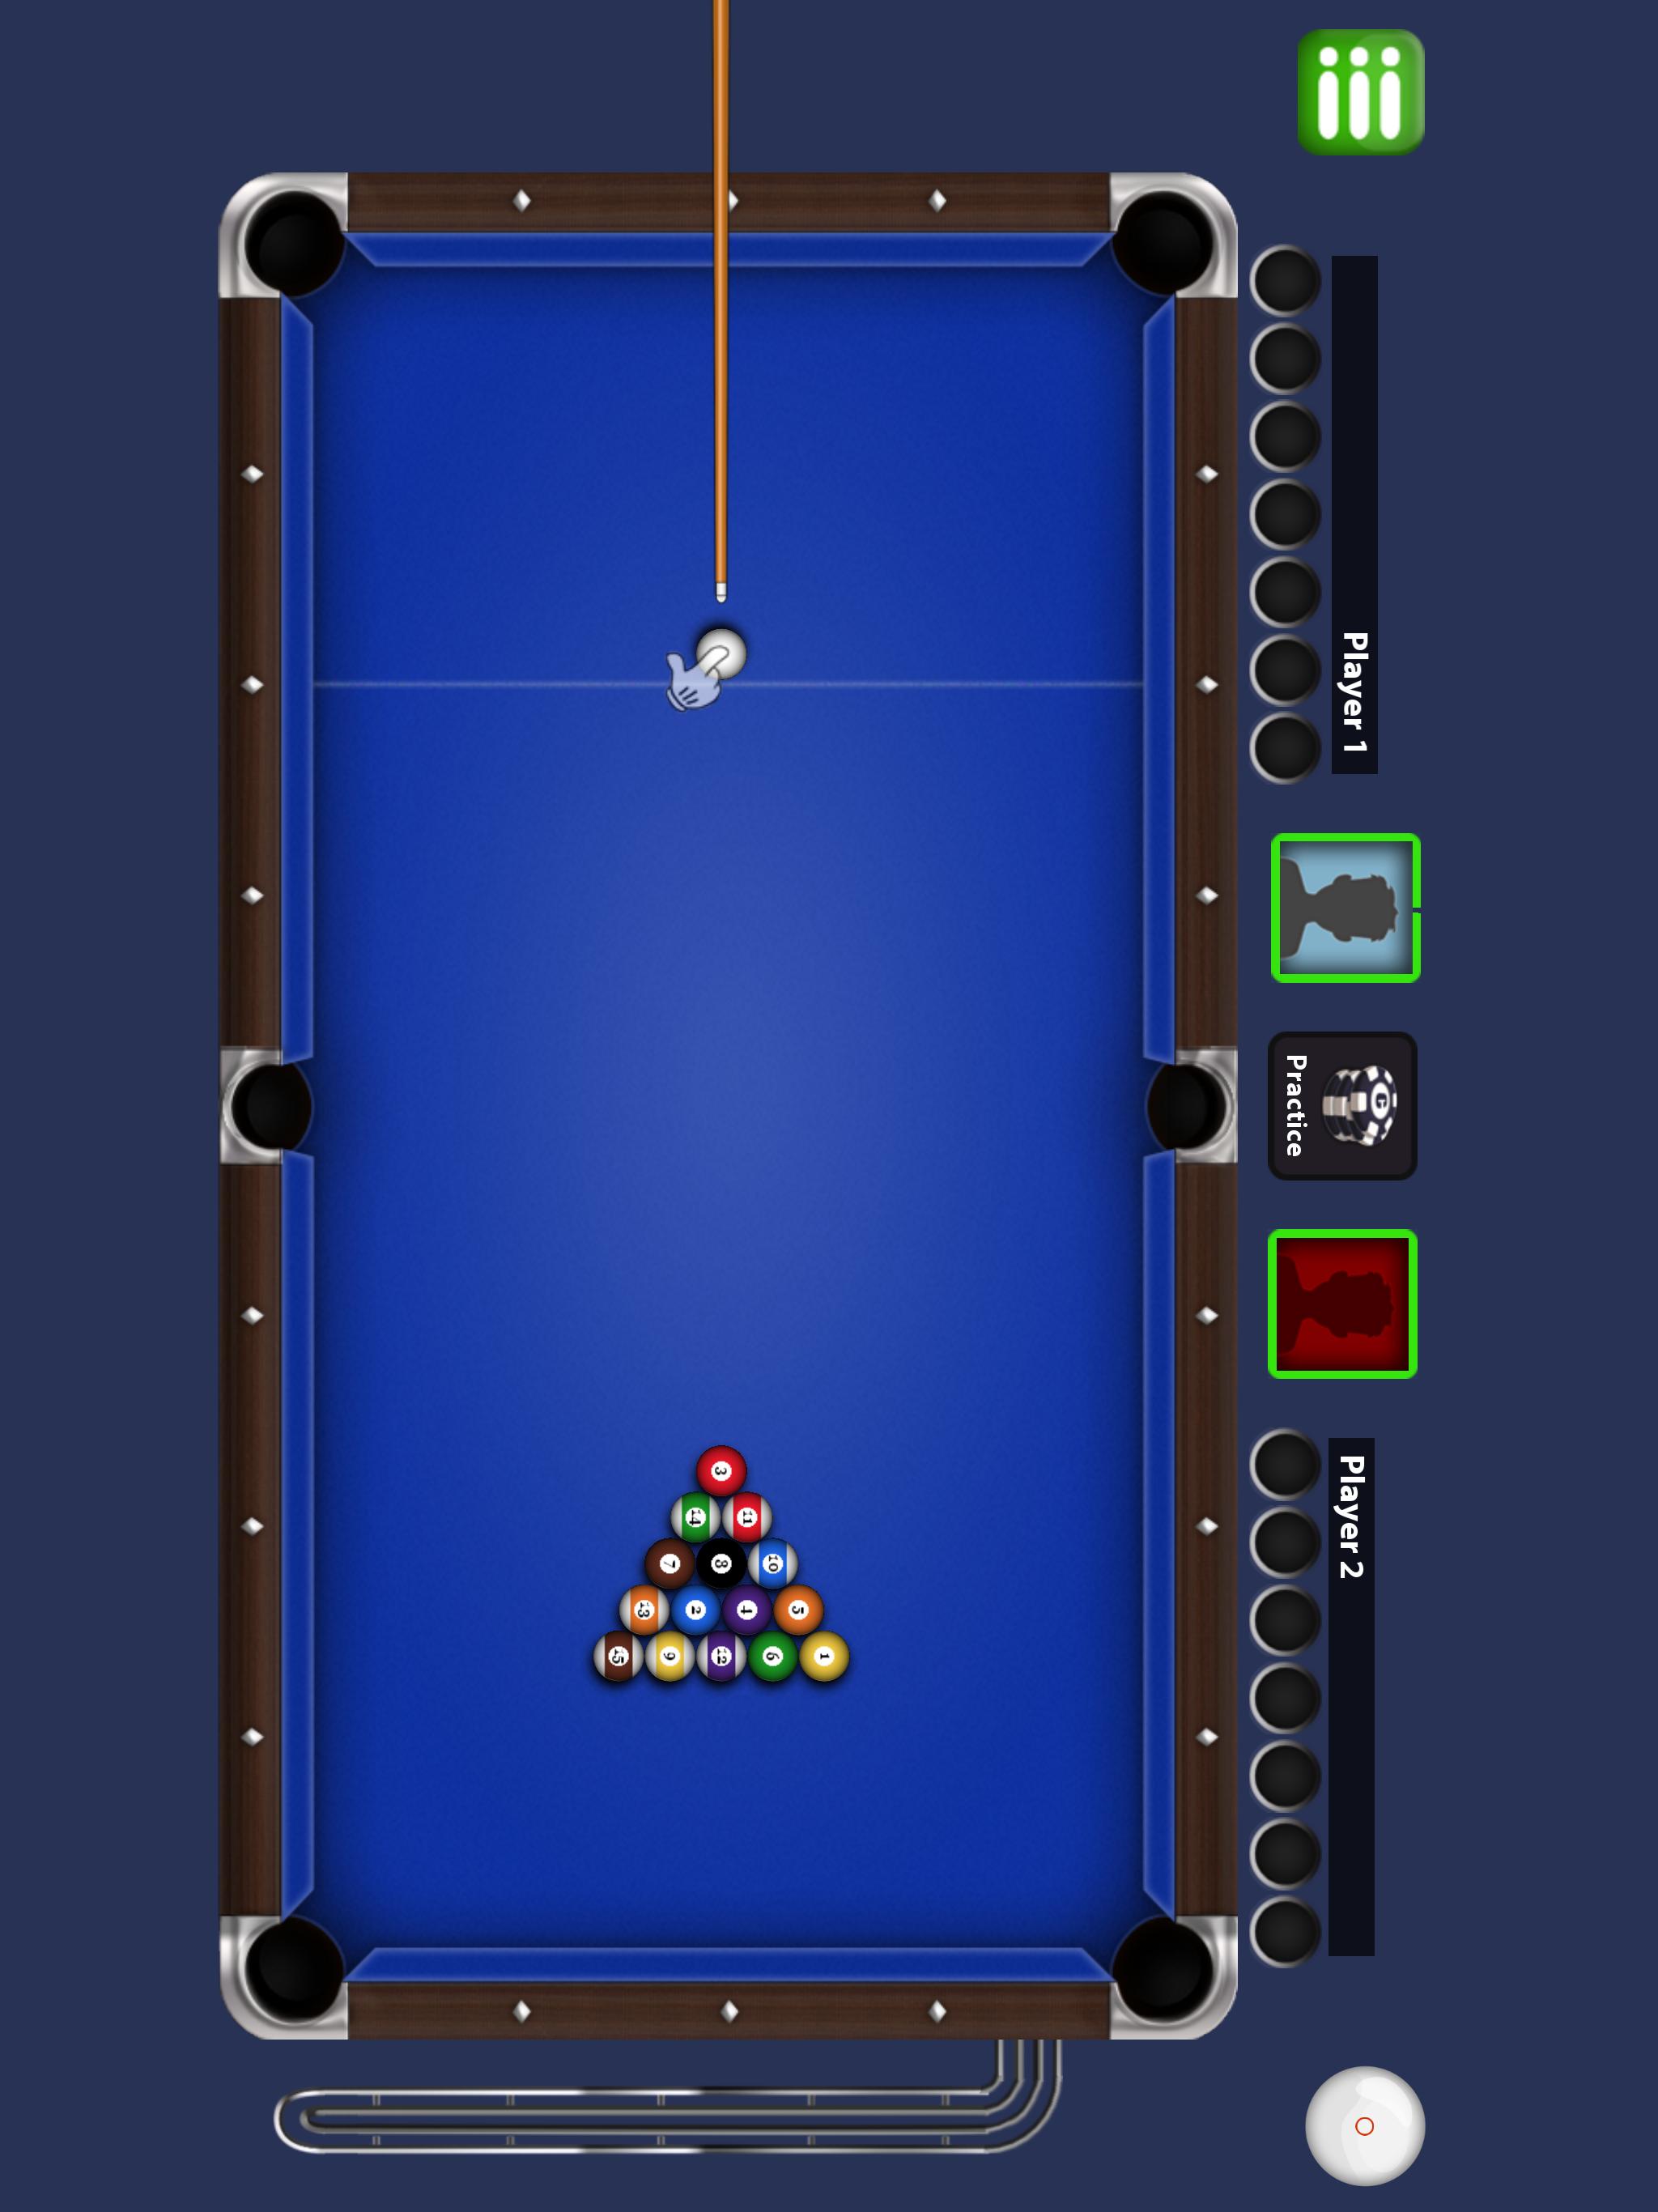 8 Ball Pool Club for Android - APK Download - 